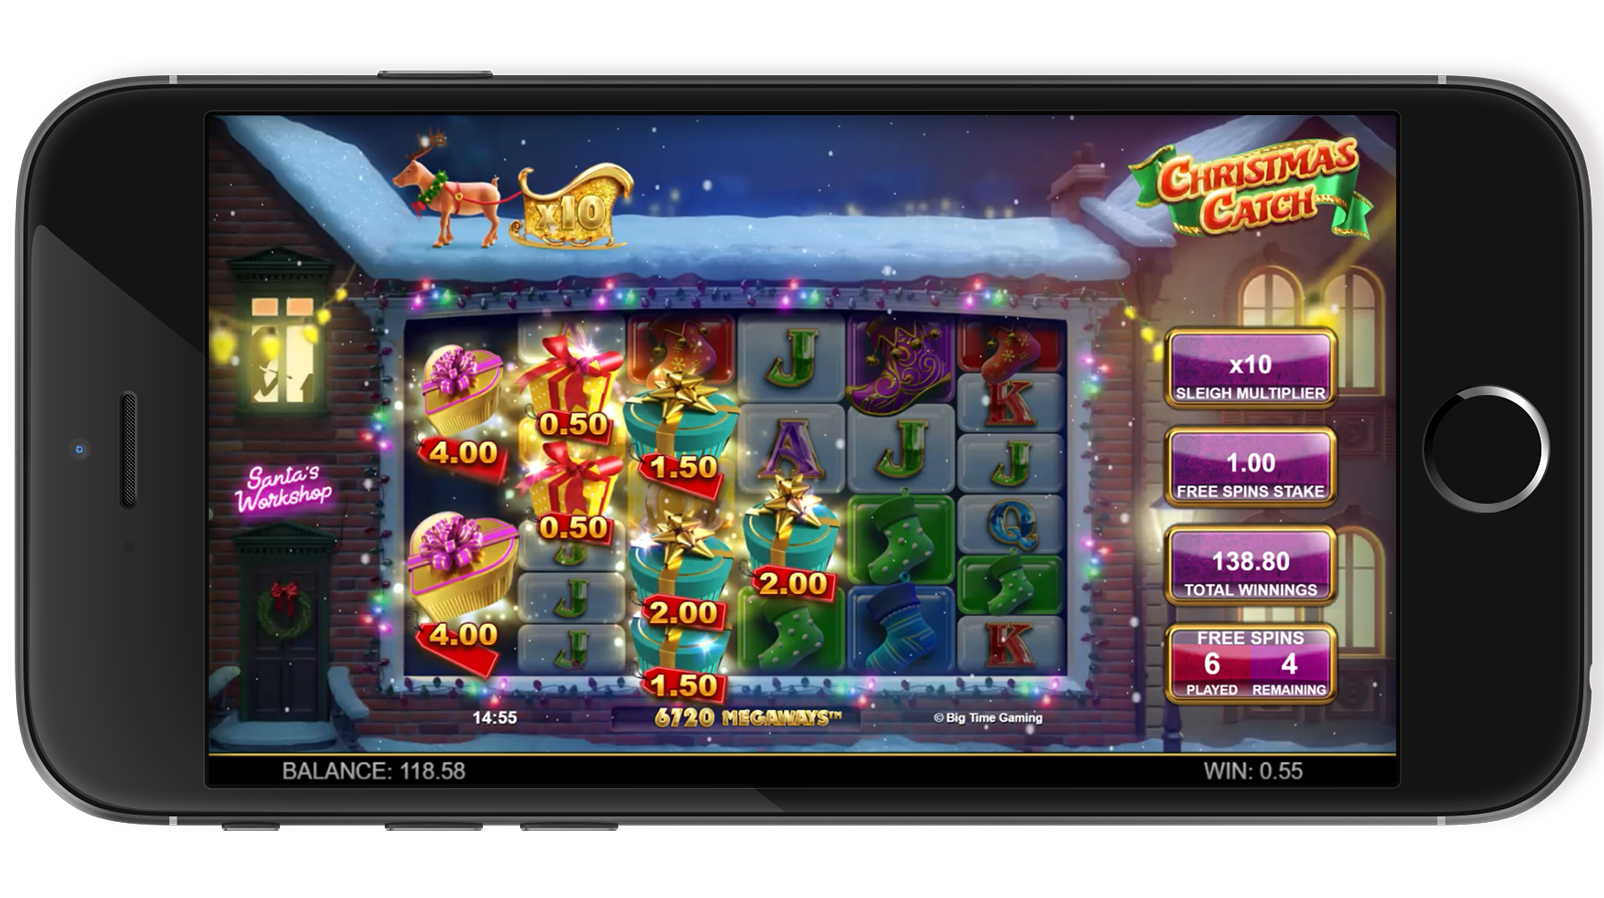 ChristmasCatch_FreeSpins_10_mobile.png